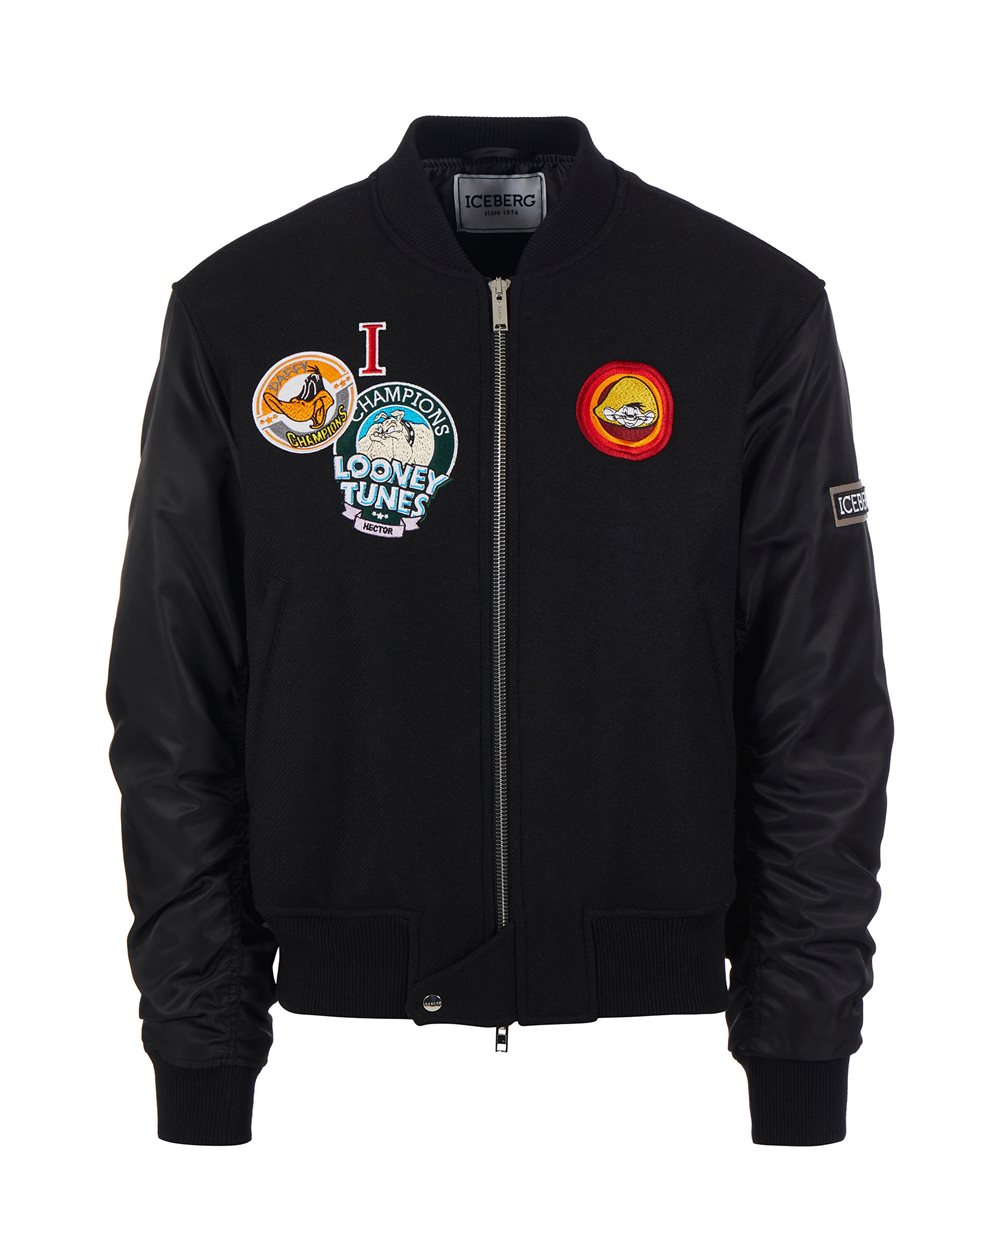 Bomber jacket with Looney Toones patch and logo - PER FARE LE REGOLE | Iceberg - Official Website